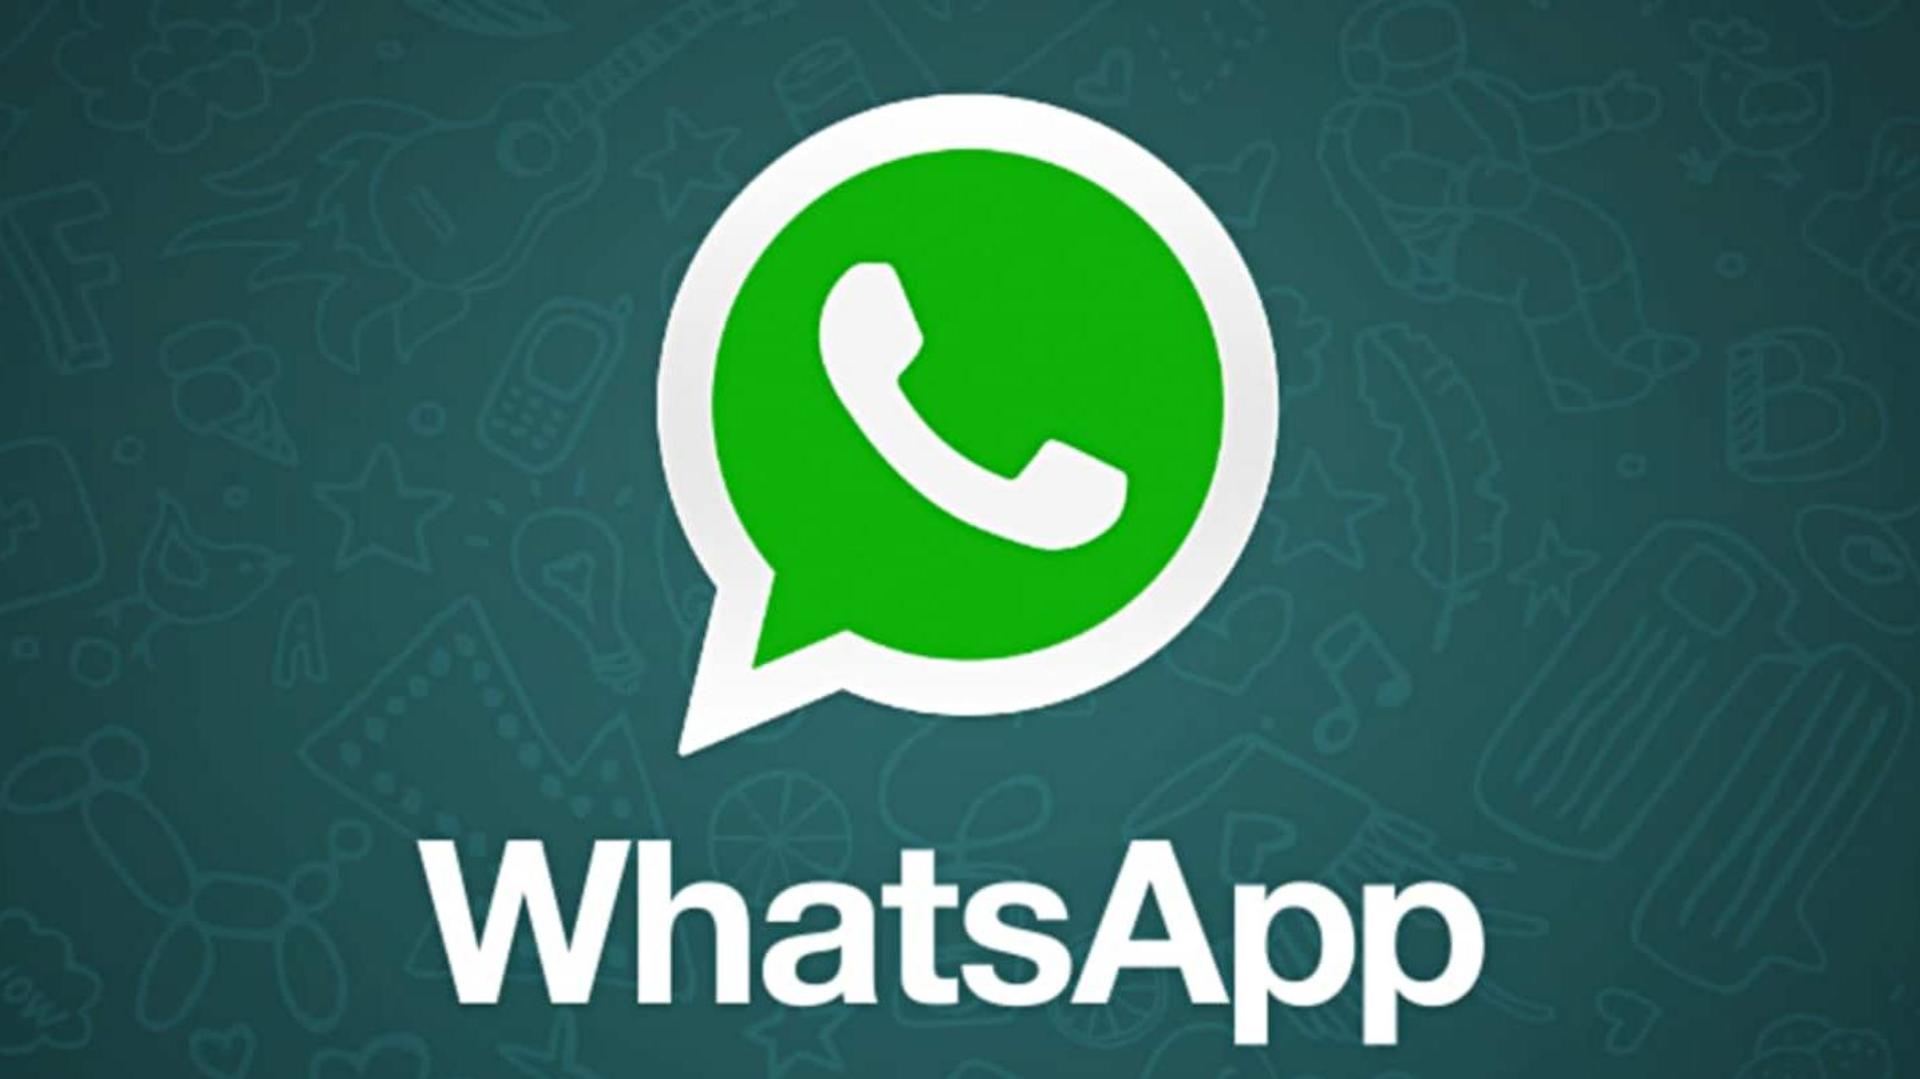 WhatsApp will soon allow you to make calls from desktop